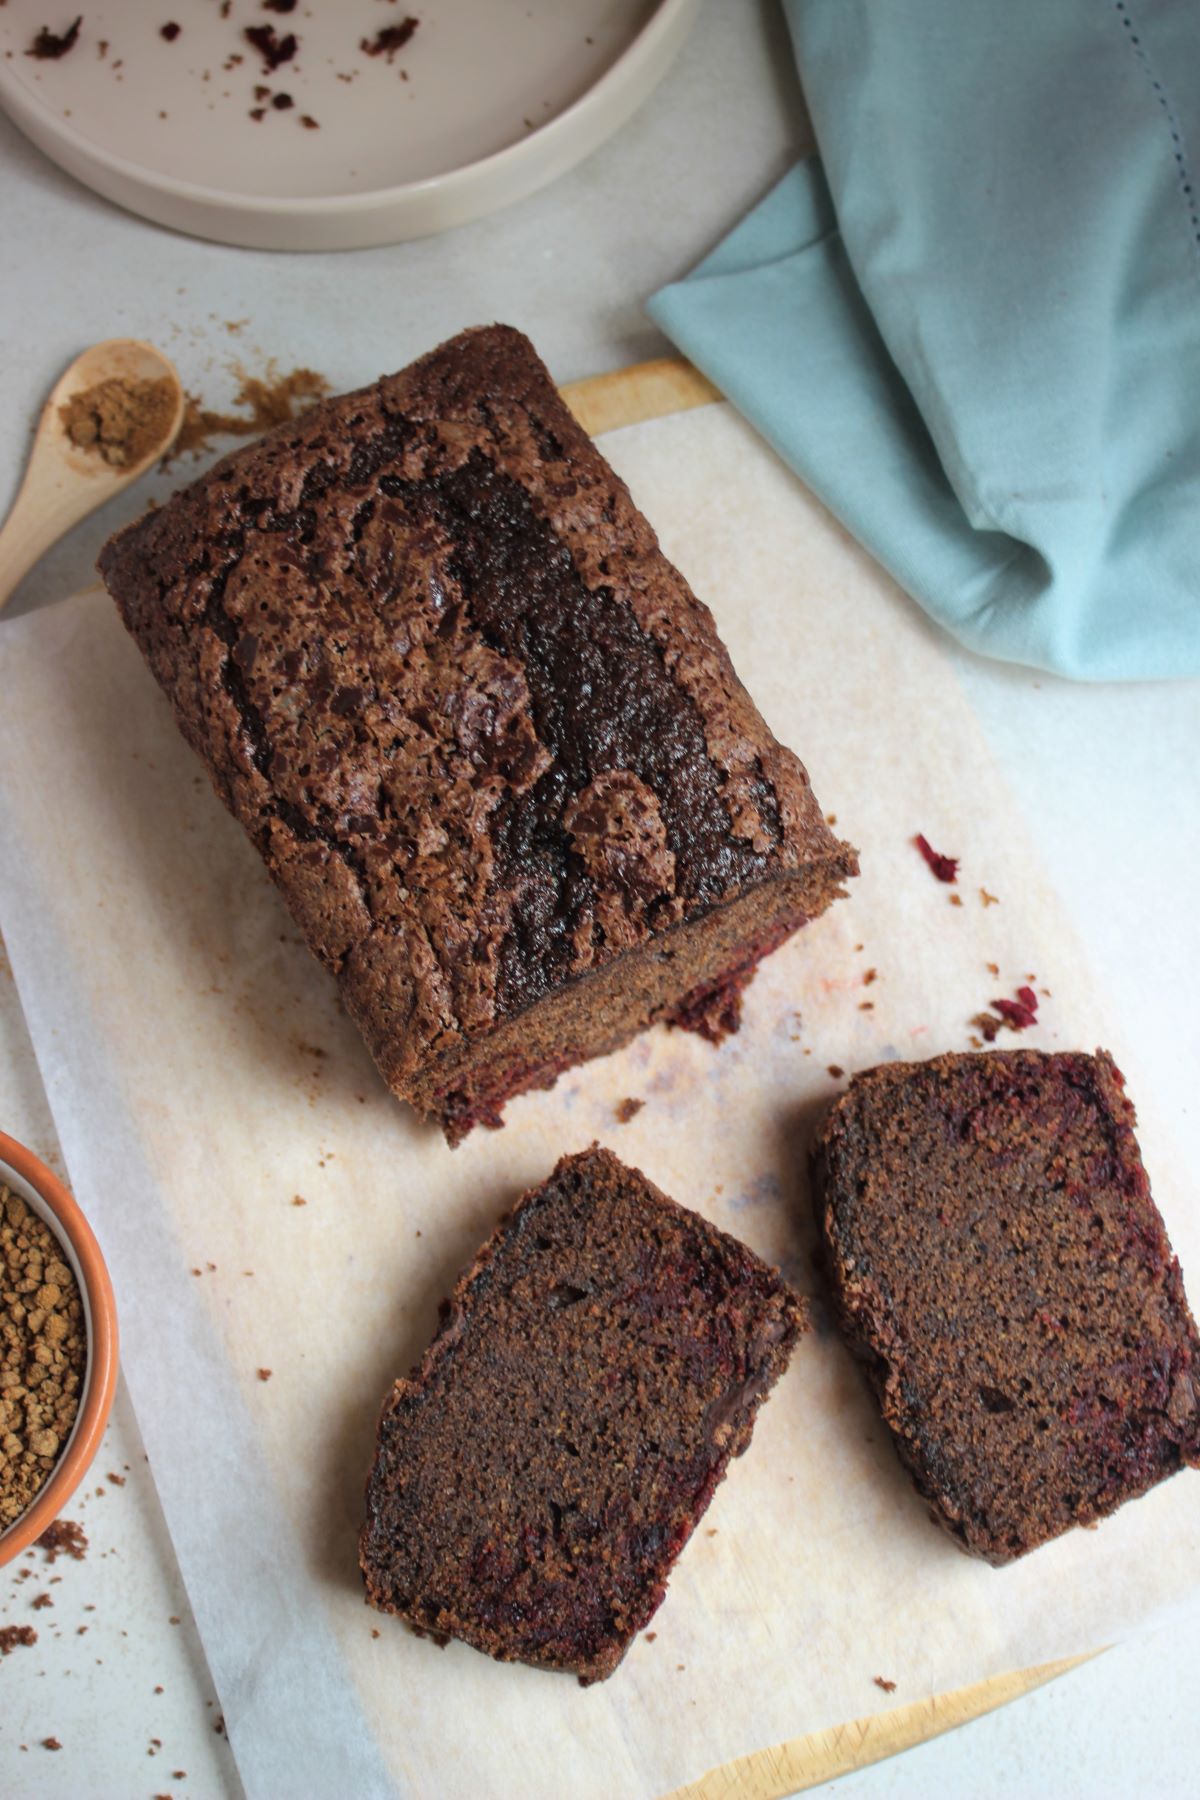 Beetroot and chocolate loaf cake with two slices of it on parchment paper.